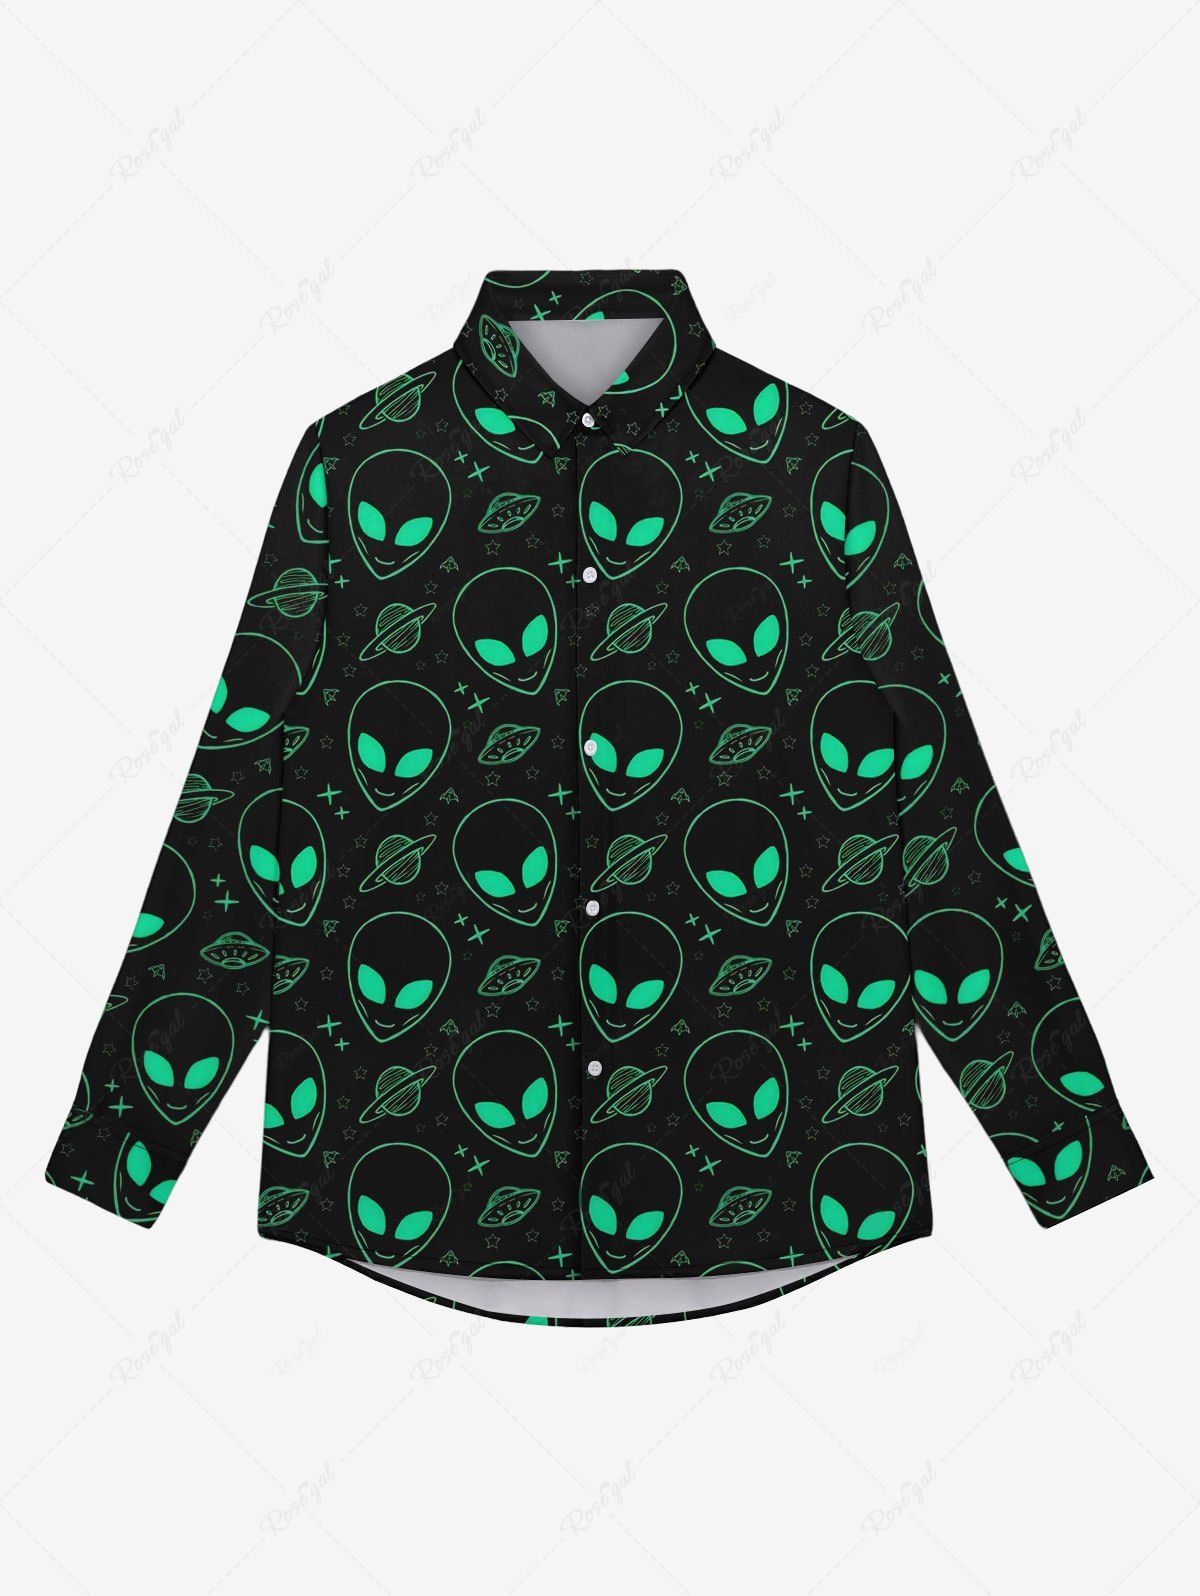 Sale Gothic Turn-down Collar Alien UFO Planet Print Buttons Shirt For Men  